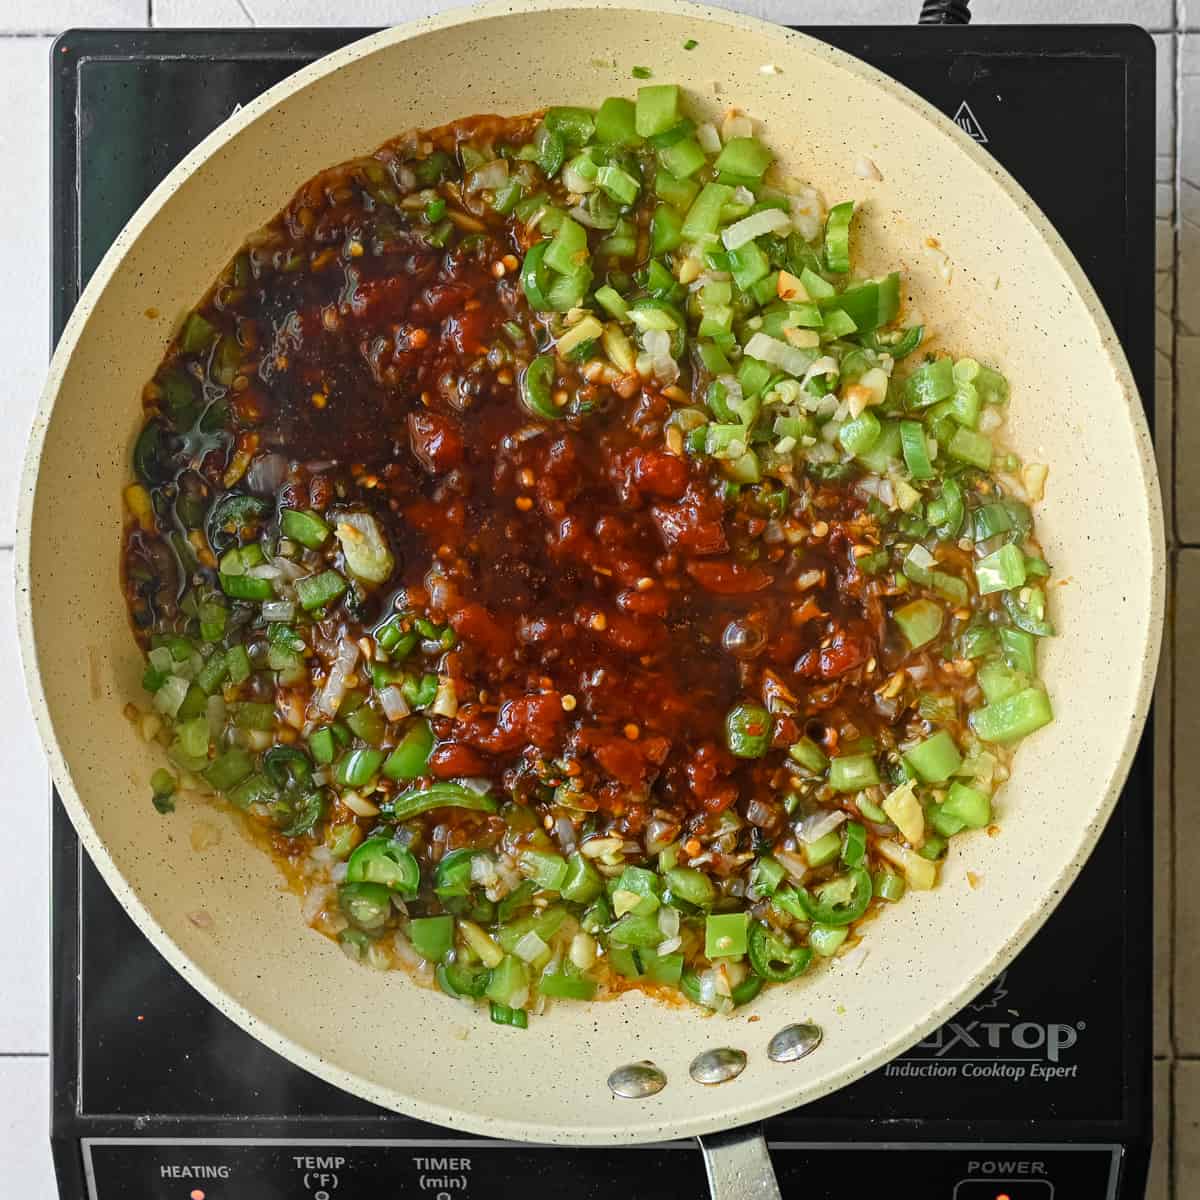 Manchurian sauce with scallions, shallots, green peppers, garlic and ginger frying in saute pan